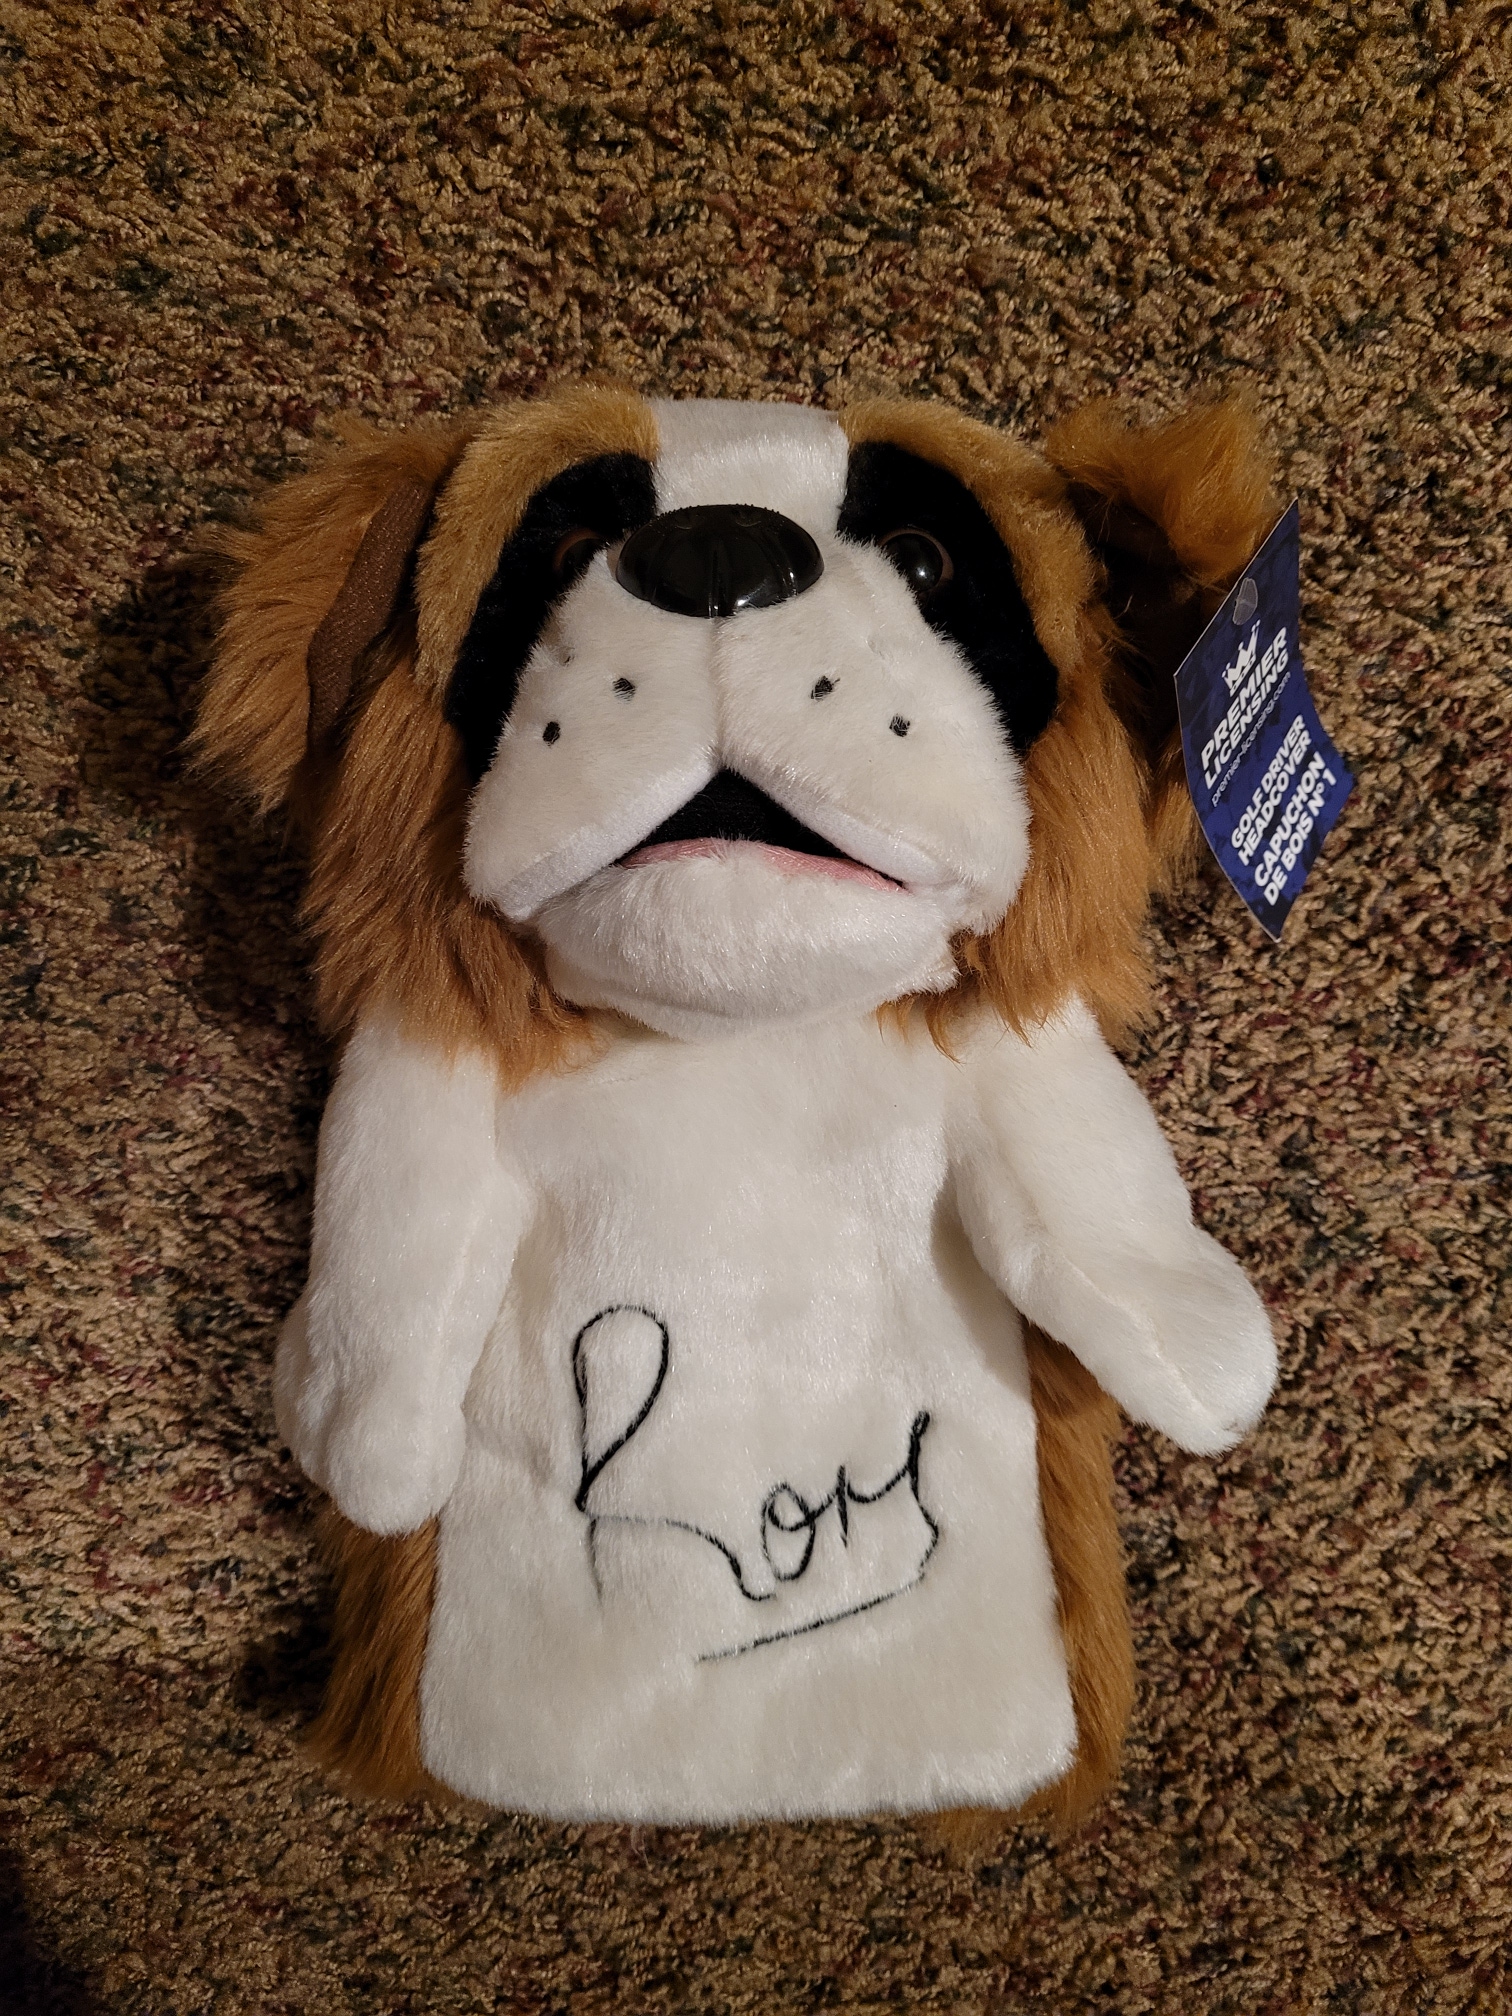 New limited edition Rory St Bernard driver headcover